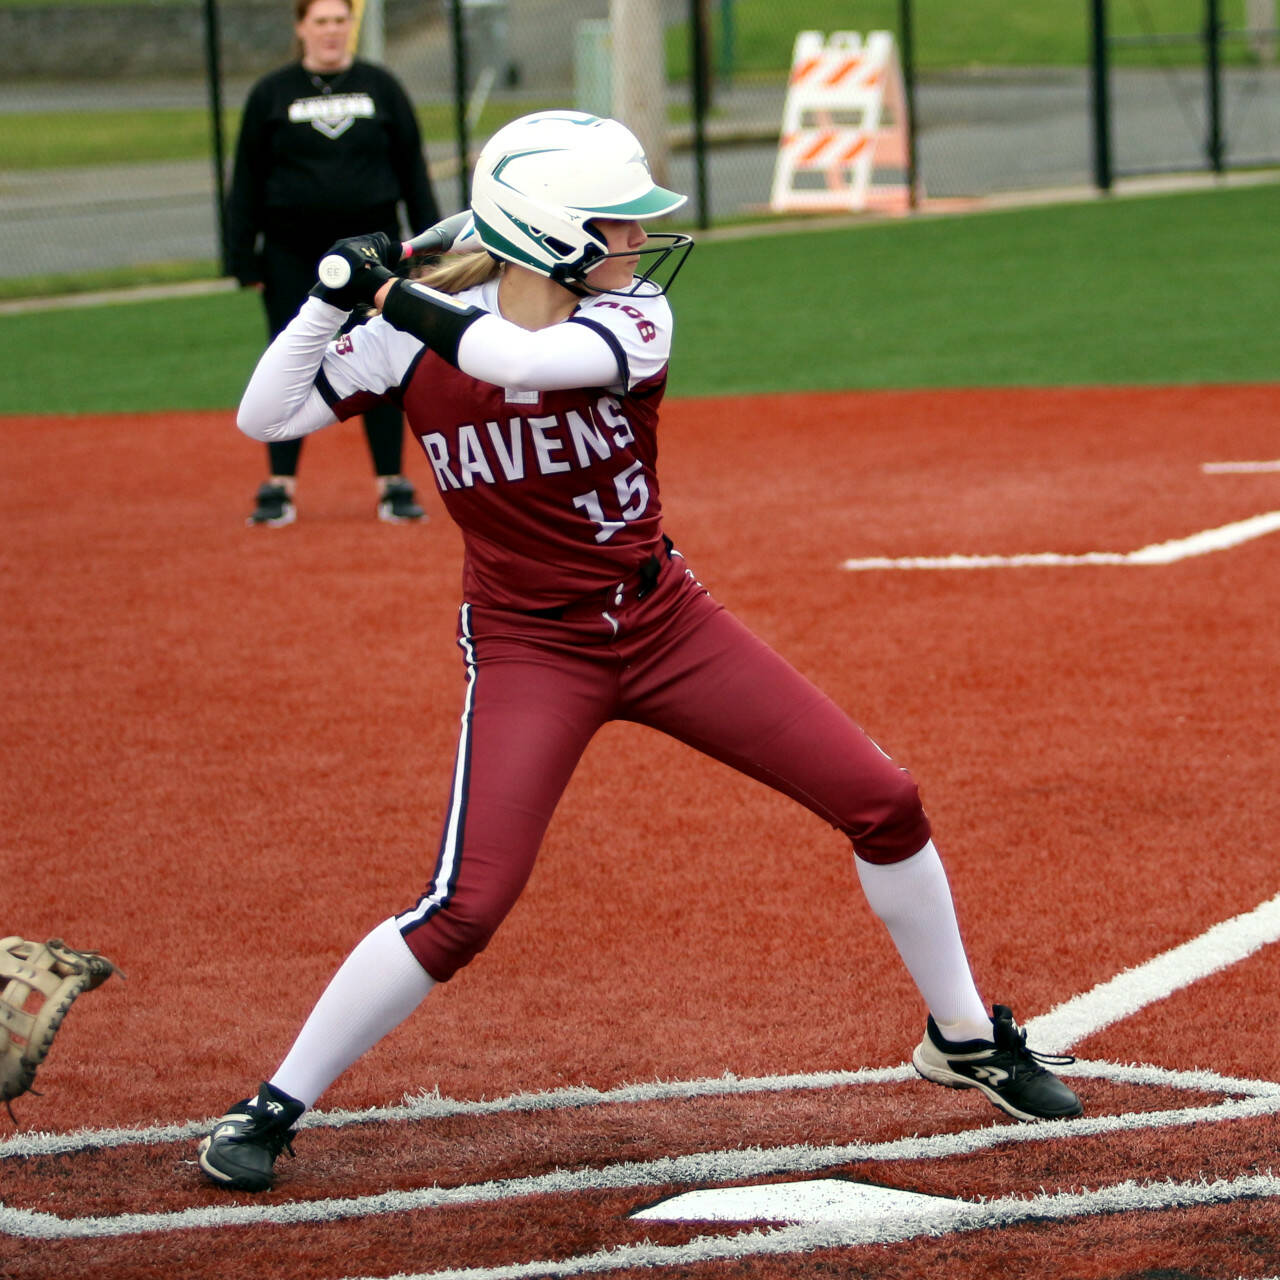 DAILY WORLD FILE PHOTO Raymond-South Bend sophomore Kassie Koski went a perfect 8-for-8 in the Ravens’ double-header sweep over Ilwaco on Tuesday in South Bend.